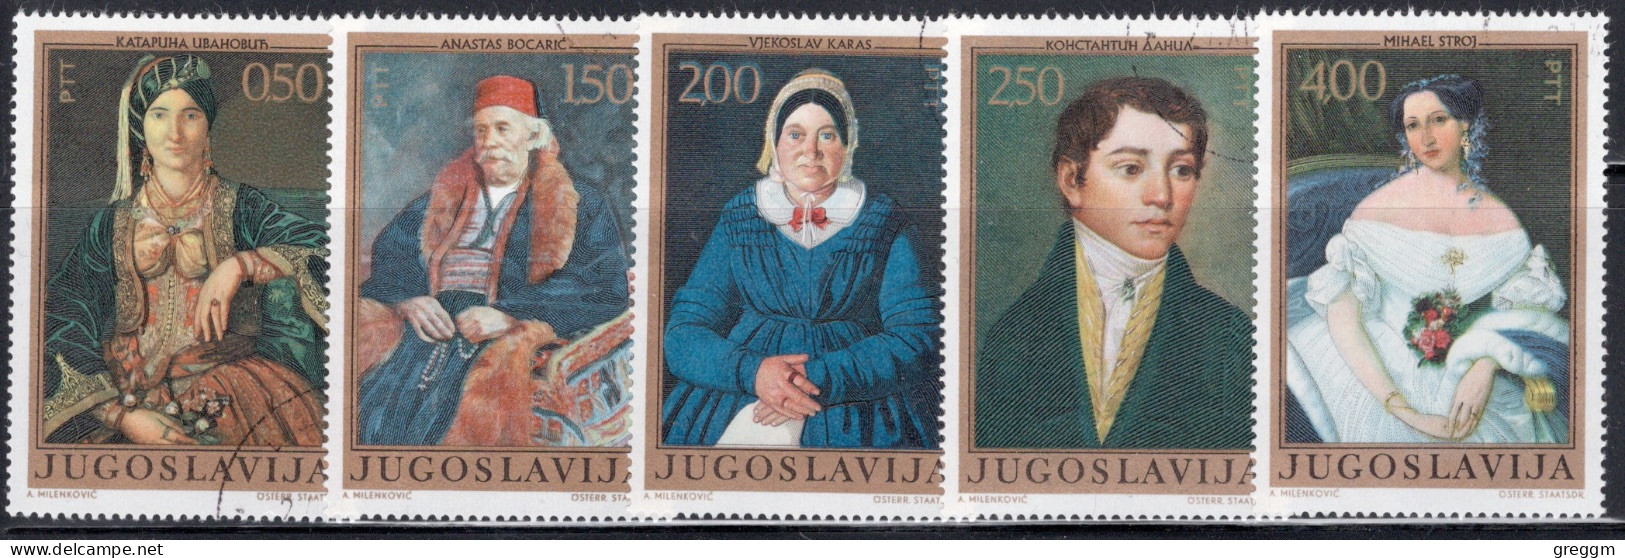 Yugoslavia 1971 Short Set Of Stamps For Portraits From The 19th Century  In Fine Used - Oblitérés